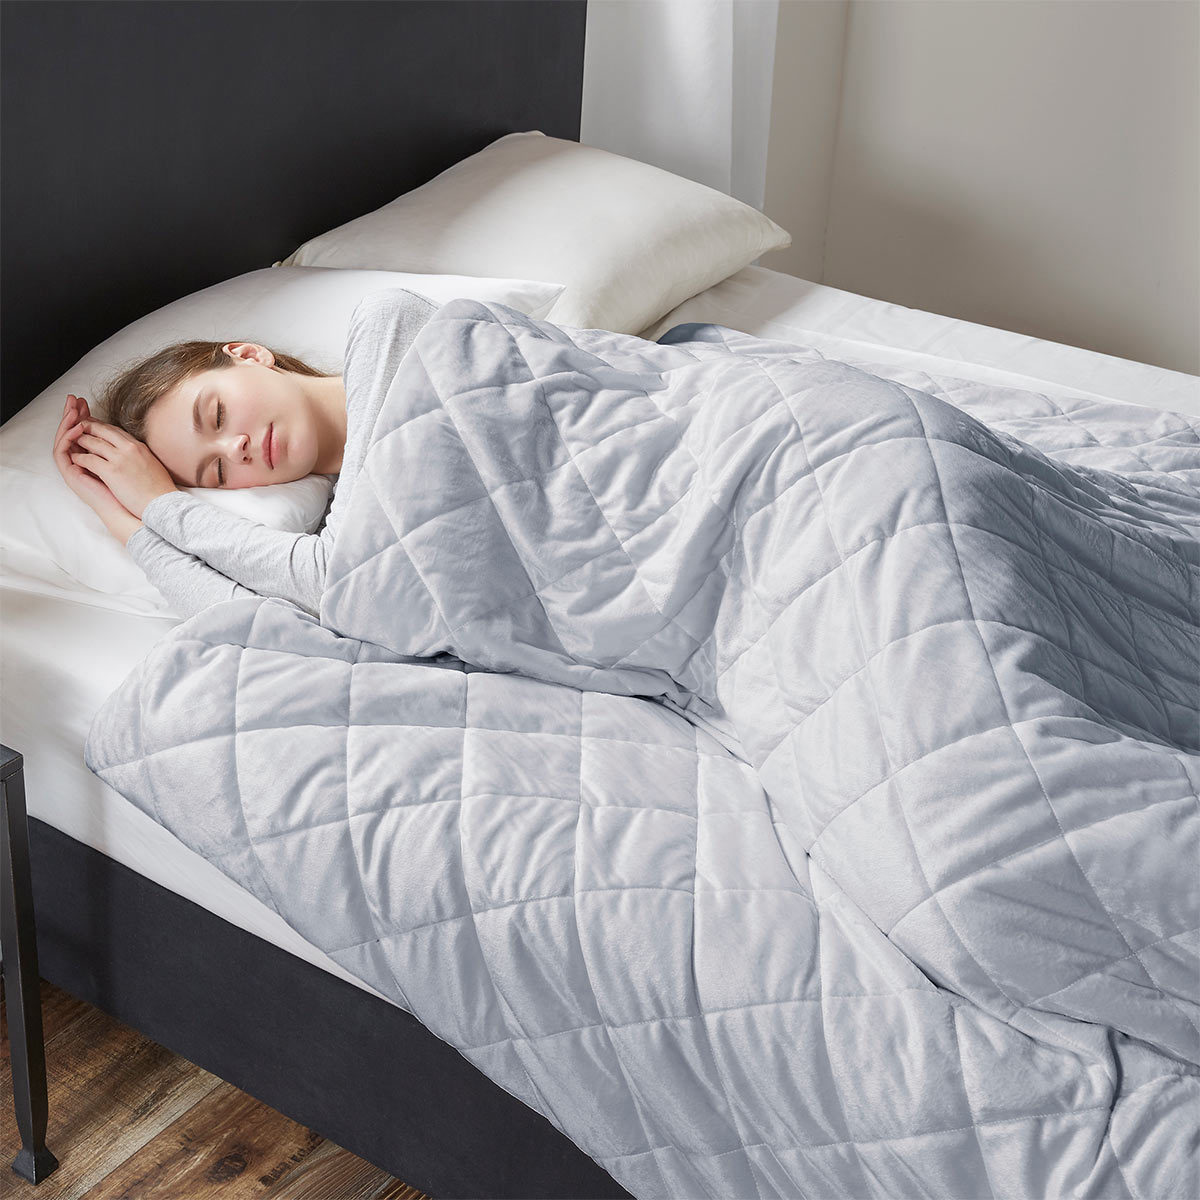 Lifestyle image of woman in bed underneath the weighted blanket